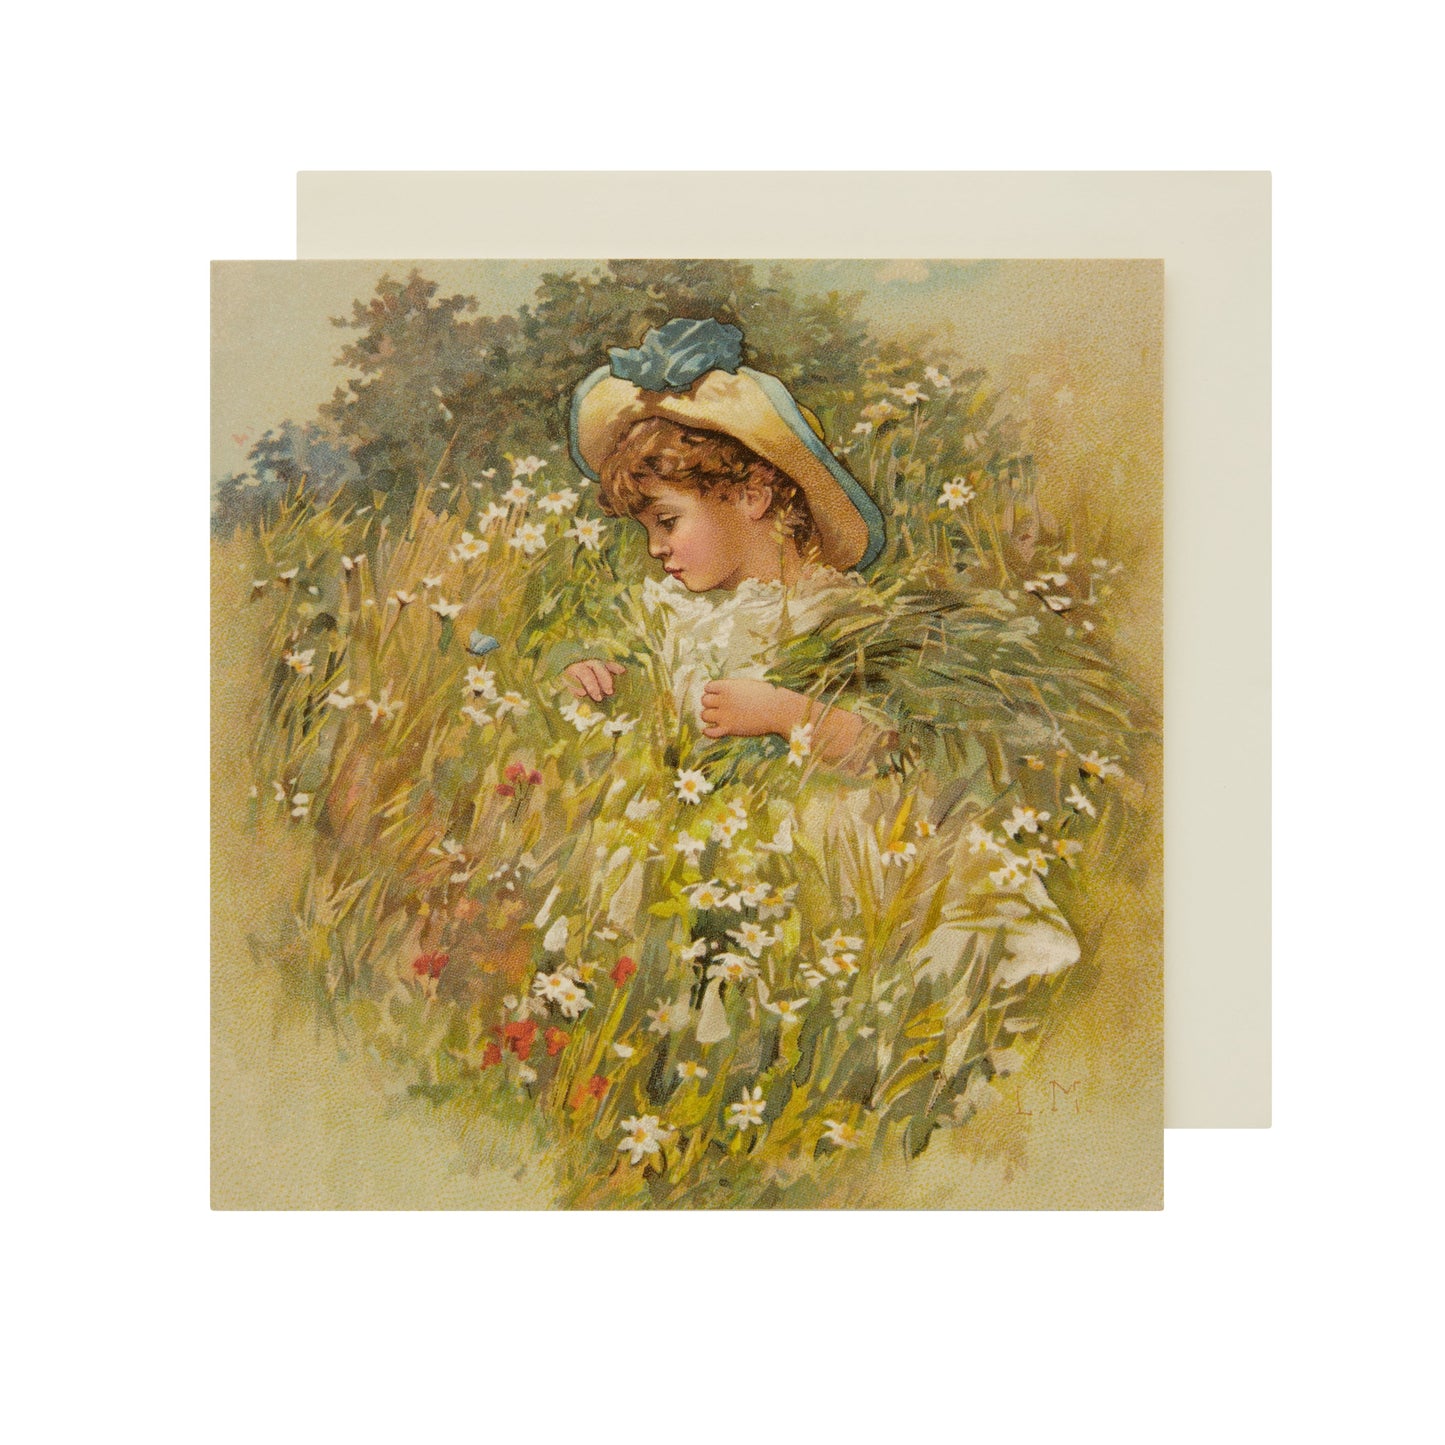 Among the Flowers - Easter card